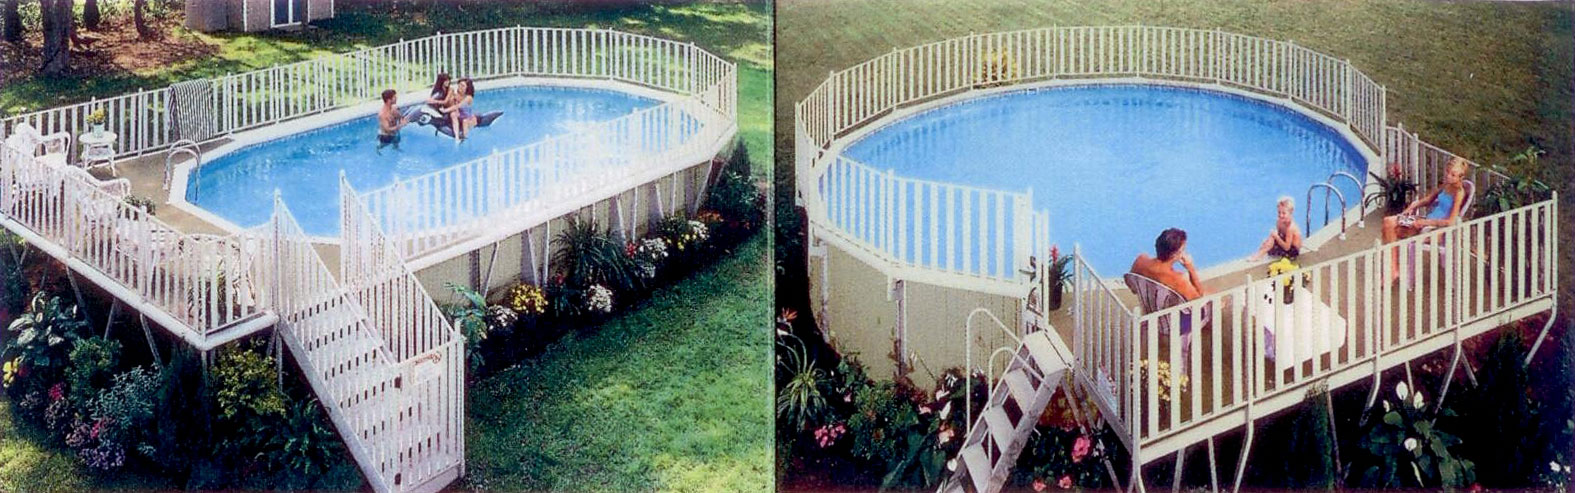 Regency above ground pool, Above ground pool with decks